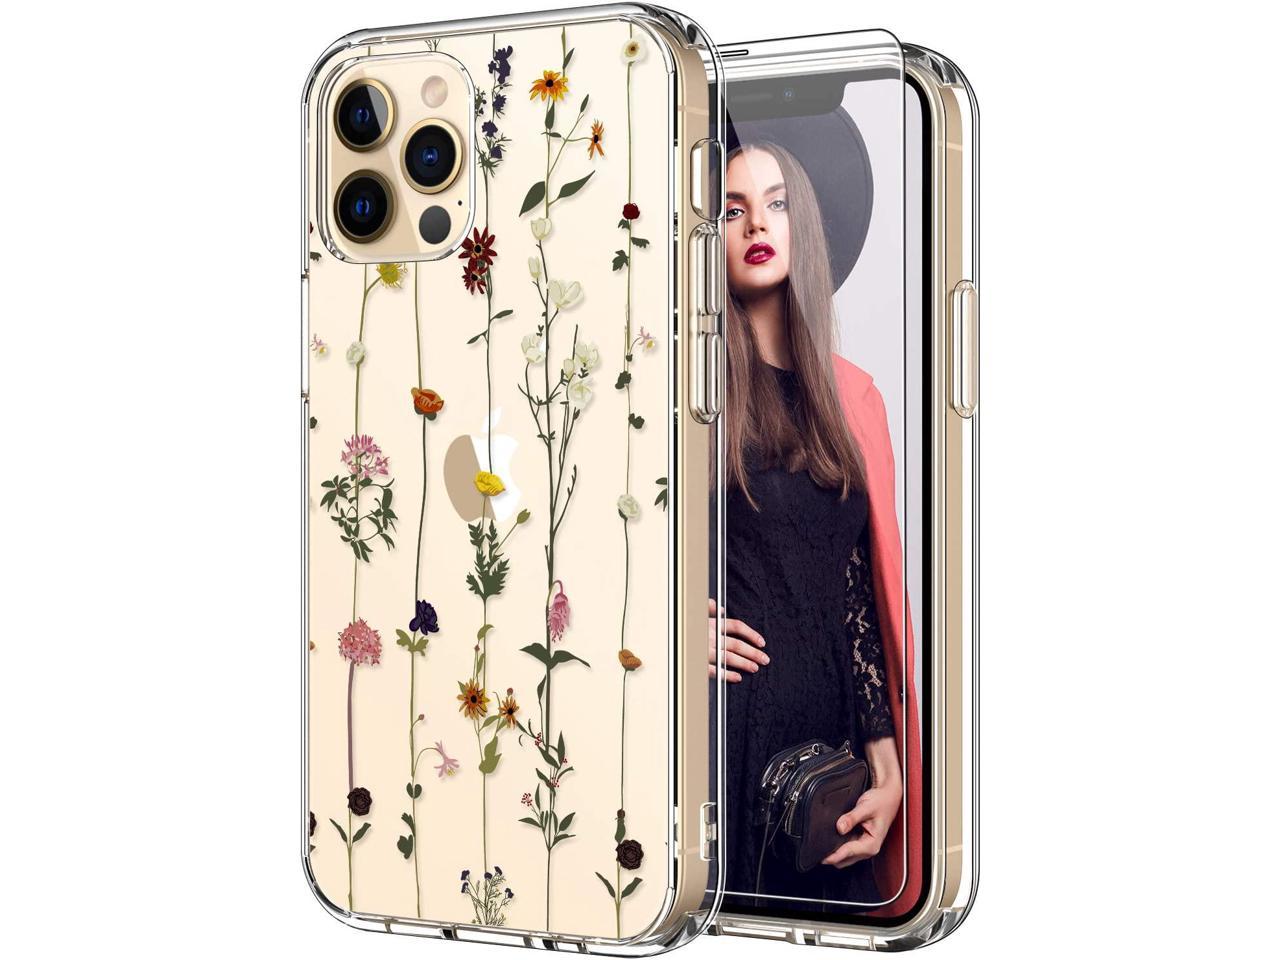 Icedio For Iphone 12 Mini Case With Screen Protectorclear With Elegant Floral Flower Patterns For Girls Womenshockproof Slim Fit Tpu Cover Protective Phone Case For Iphone 12 Mini 5 4 Newegg Com